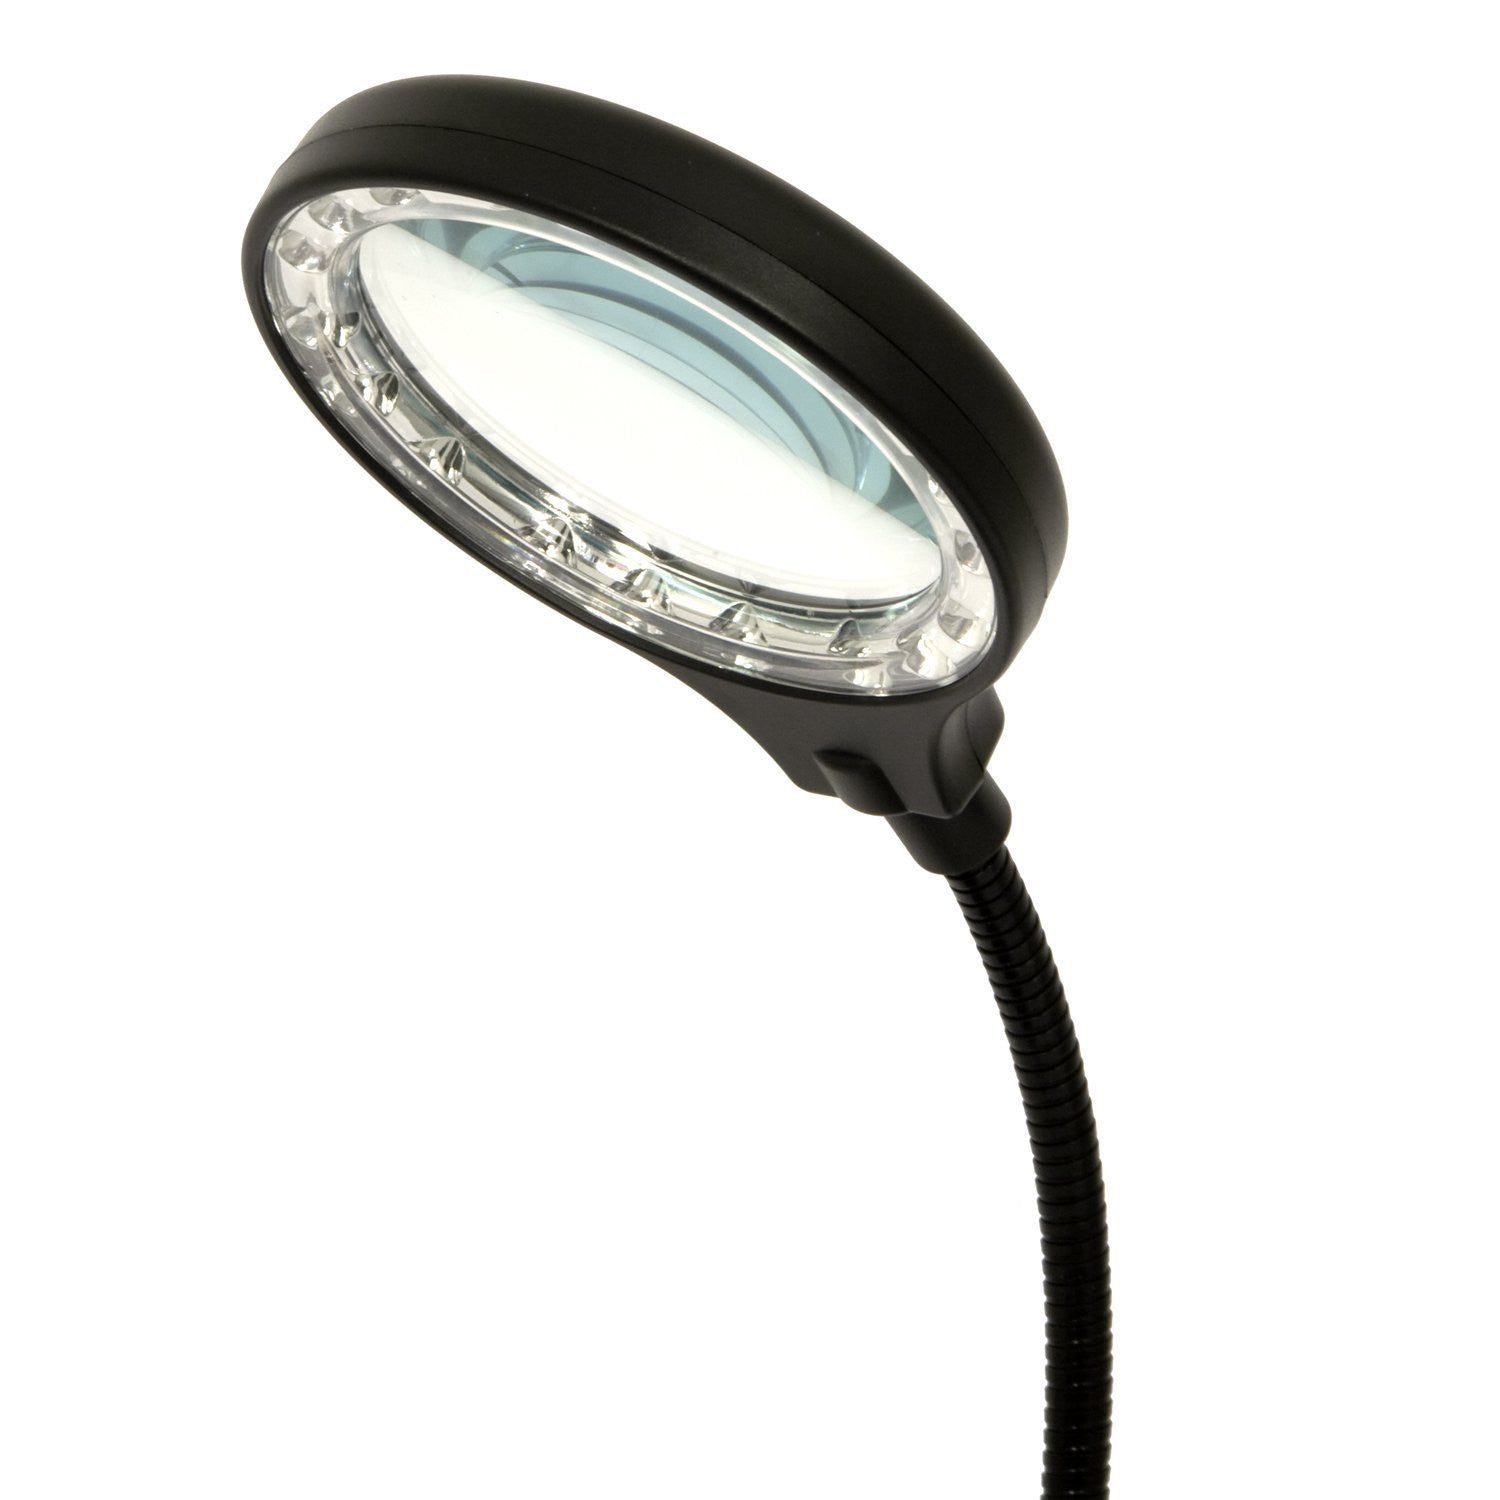 LightAccents Battery Operated Lighted Magnifier Desk Lamp with Flexible Gooseneck - LightAccents.com
 - 6